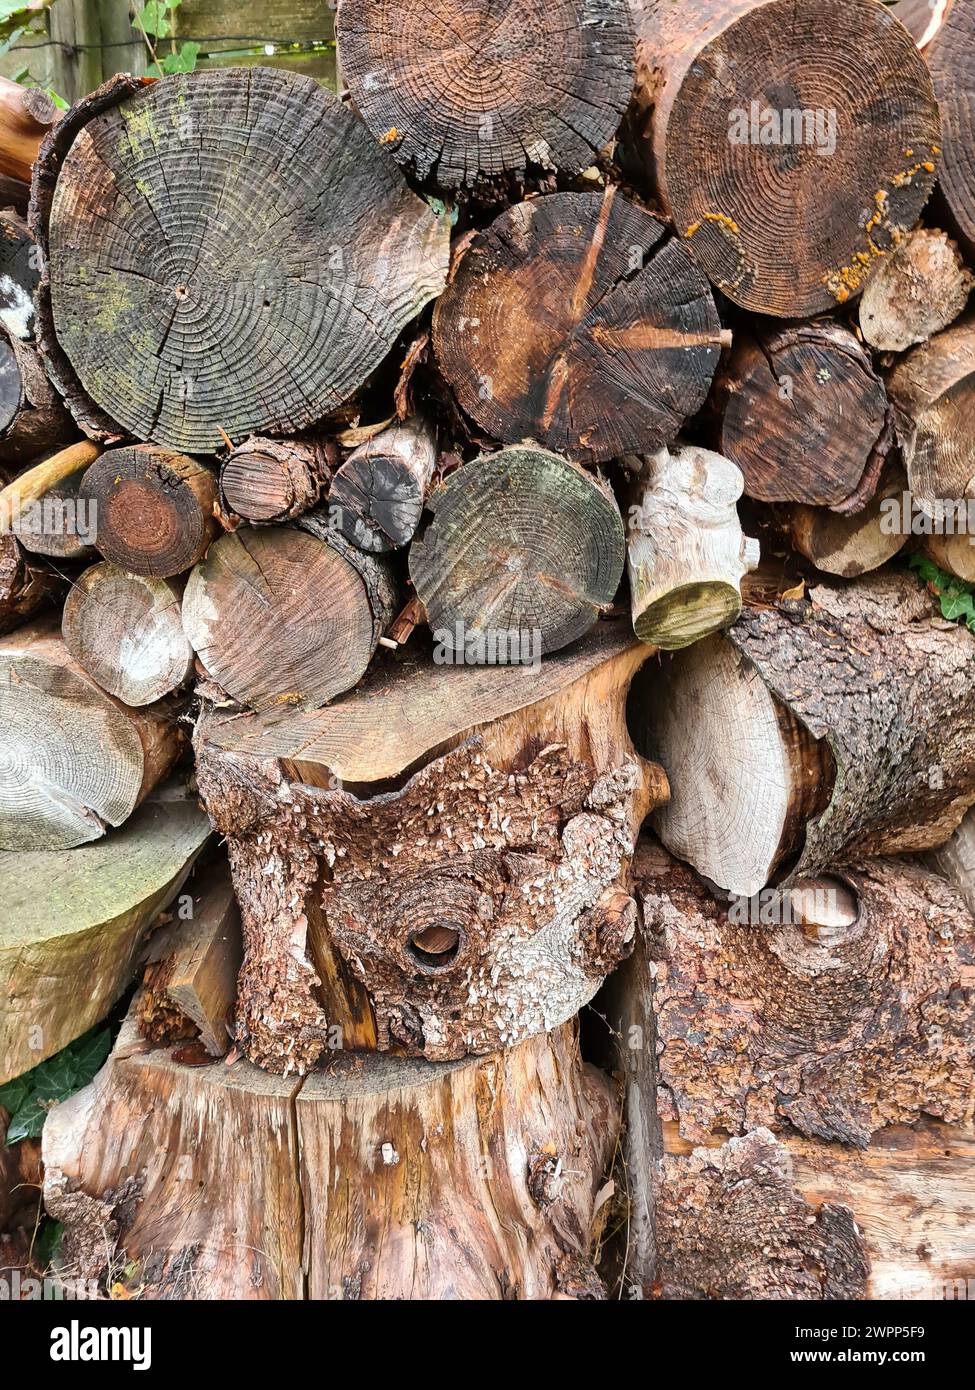 Unsorted wood pile with large tree slices and small tree trunks stored on top of each other, Berlin, Germany Stock Photo